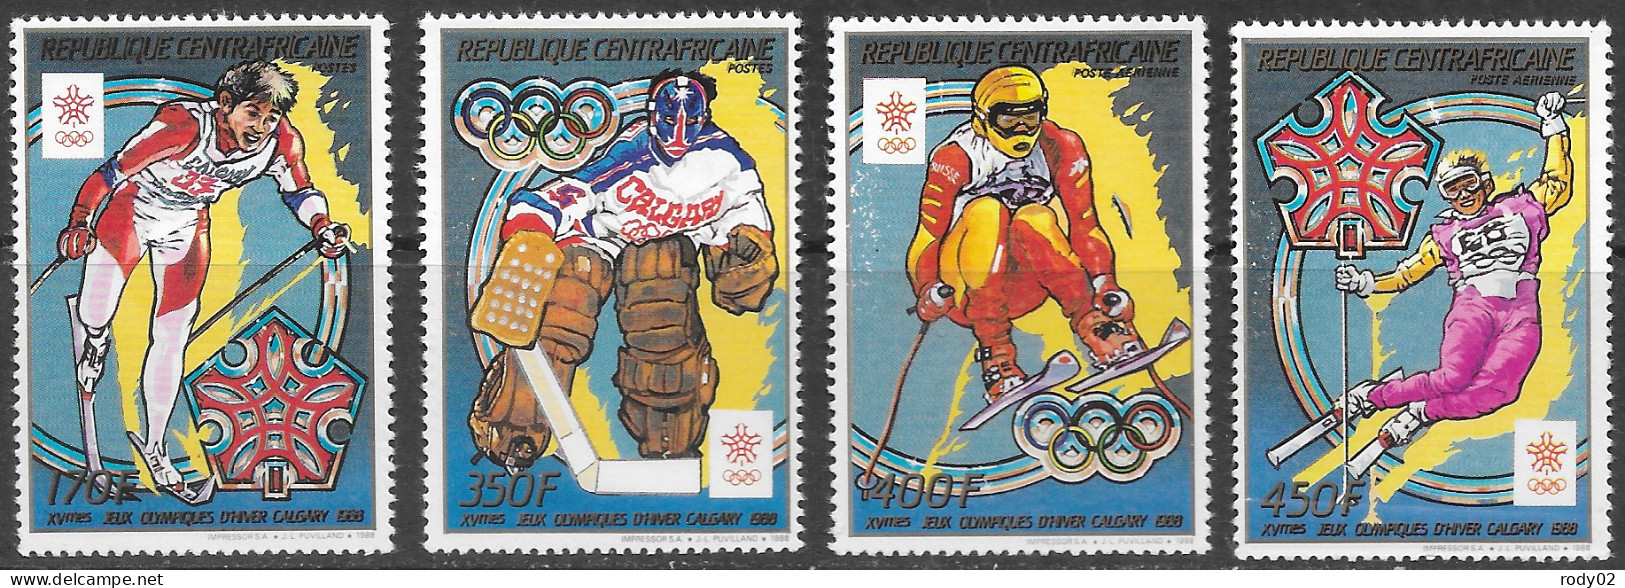 CENTRAFRIQUE - JEUX OLYMPIQUES D'HIVER A CALGARY - N° 795 A 796 ET PA 377 A 378 - NEUF** MNH - Winter 1988: Calgary